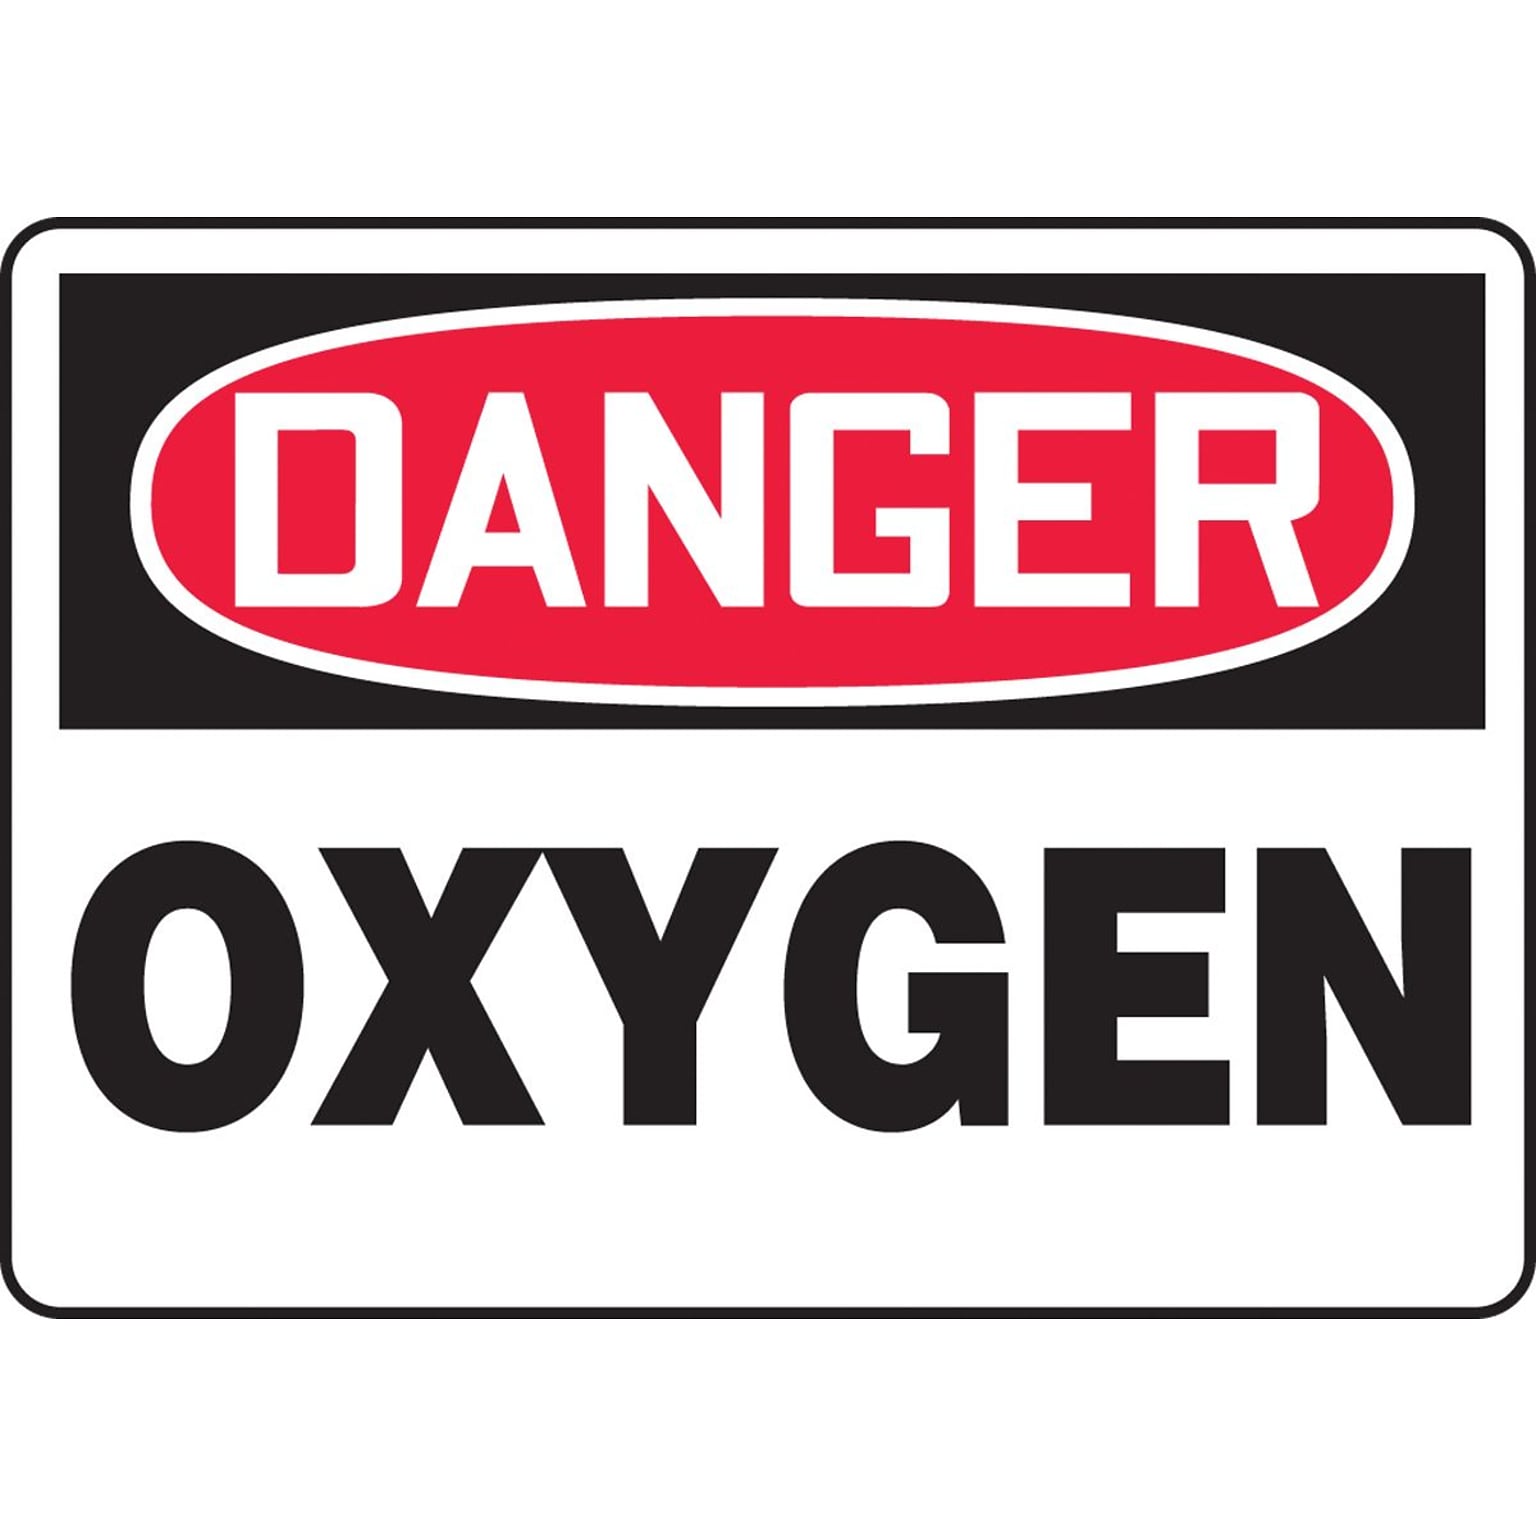 Accuform 7 x 10 Adhesive Vinyl Safety Sign DANGER OXYGEN, Red/Black On White (MCHL168VS)